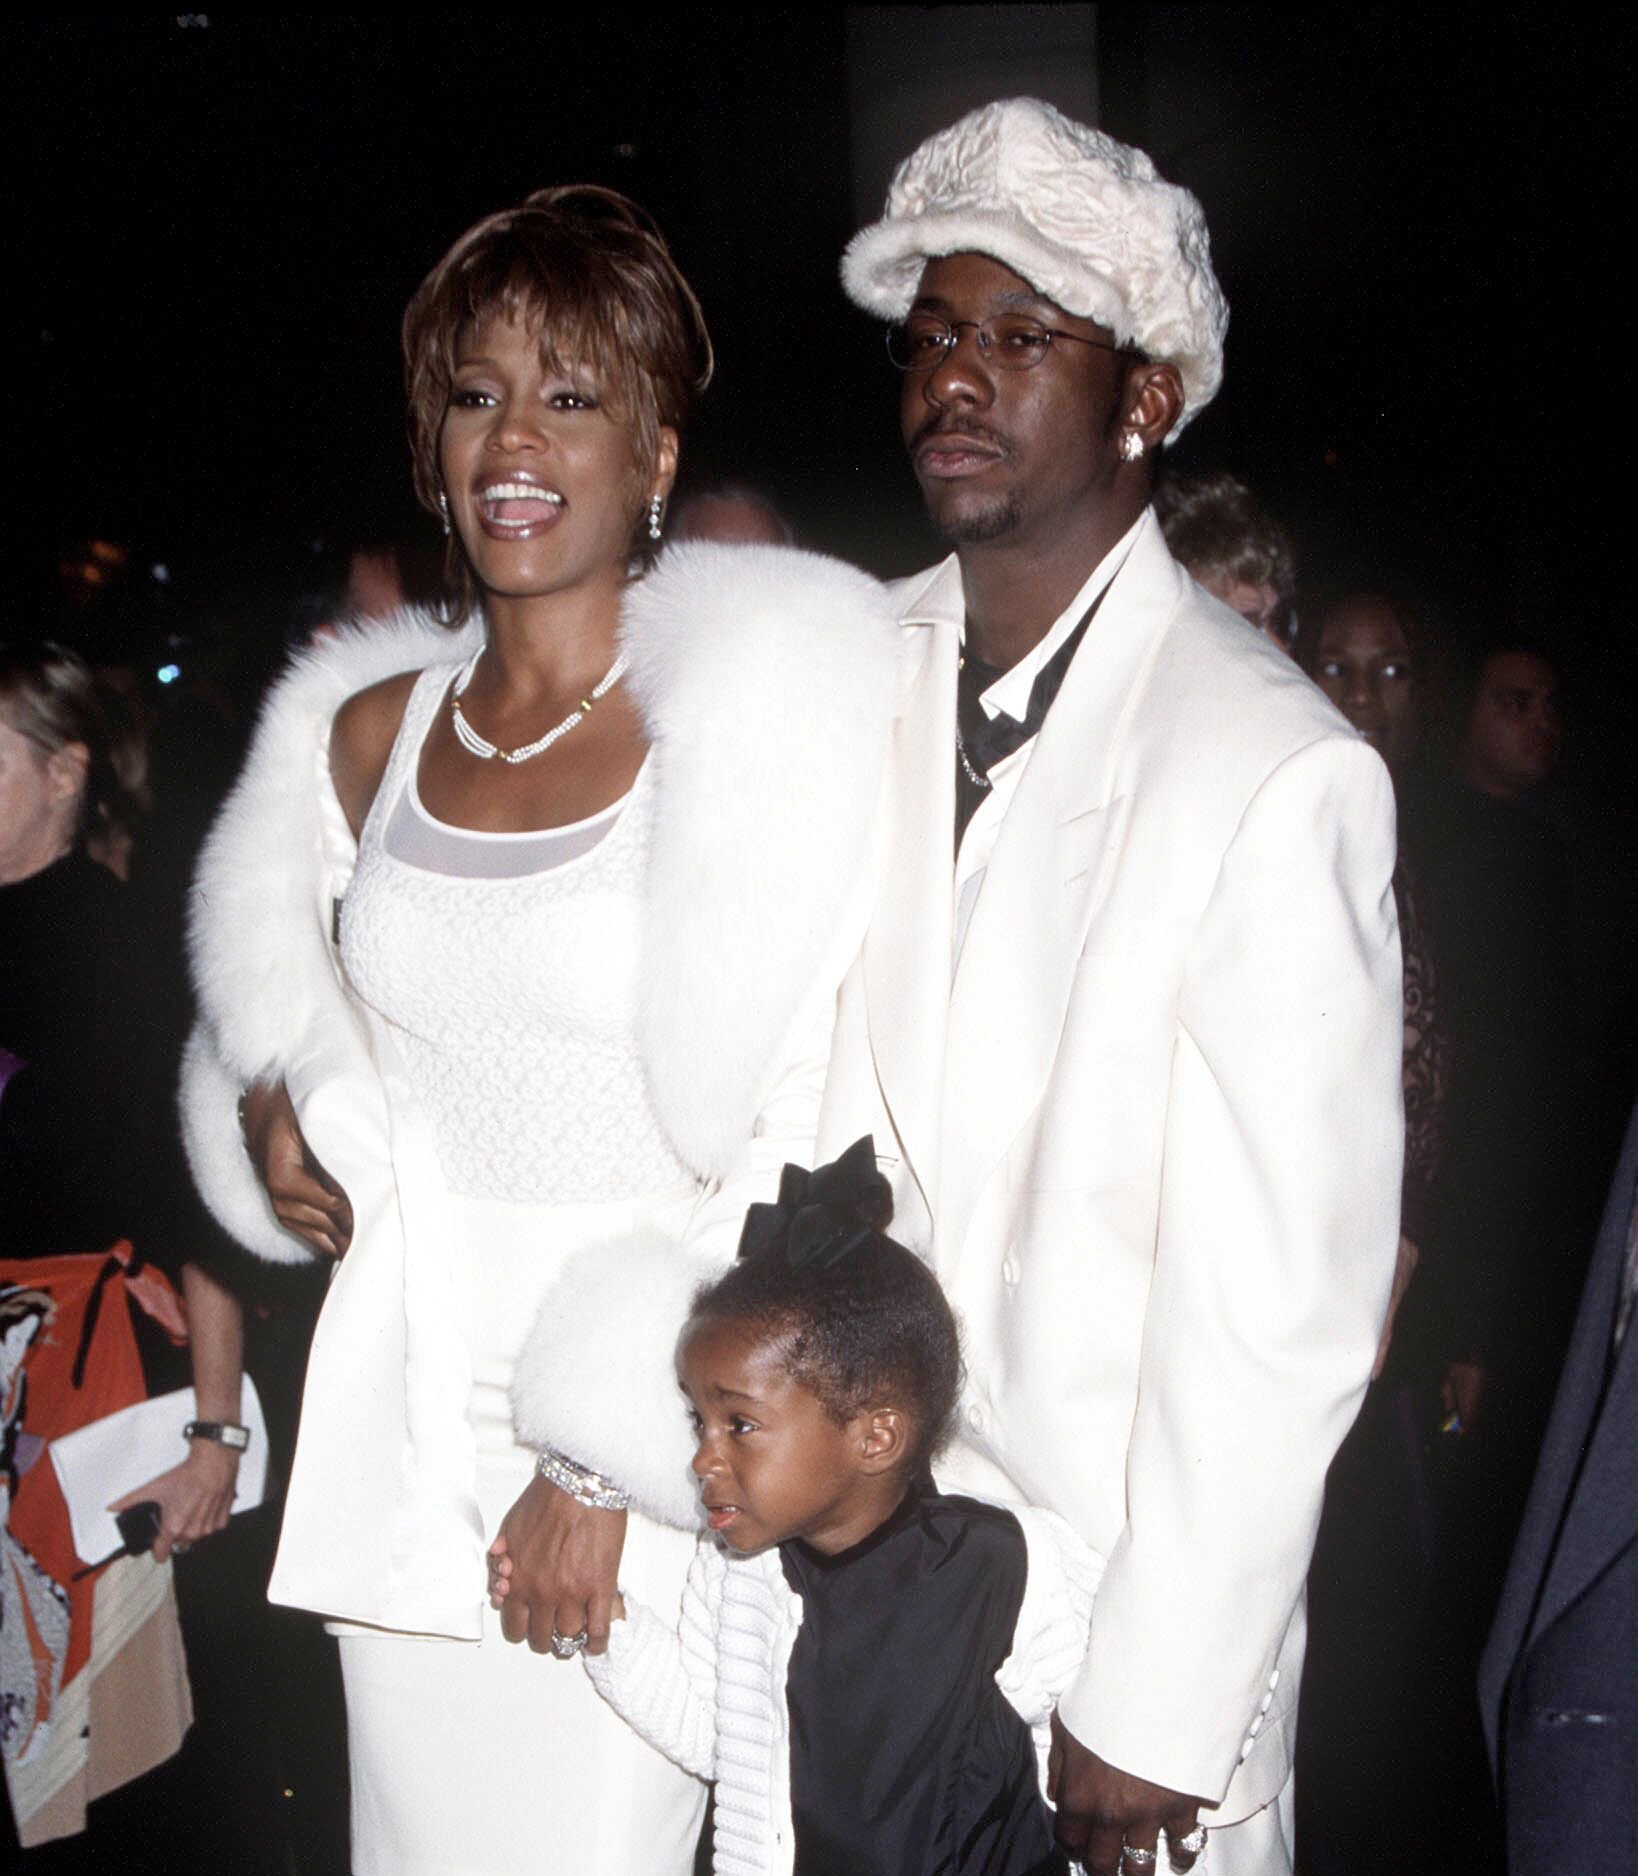 Iconic singer Whitney Houston with husband Bobby Brown and daughter Bobby Kristina in Los Angeles in 1989/ Getty Images